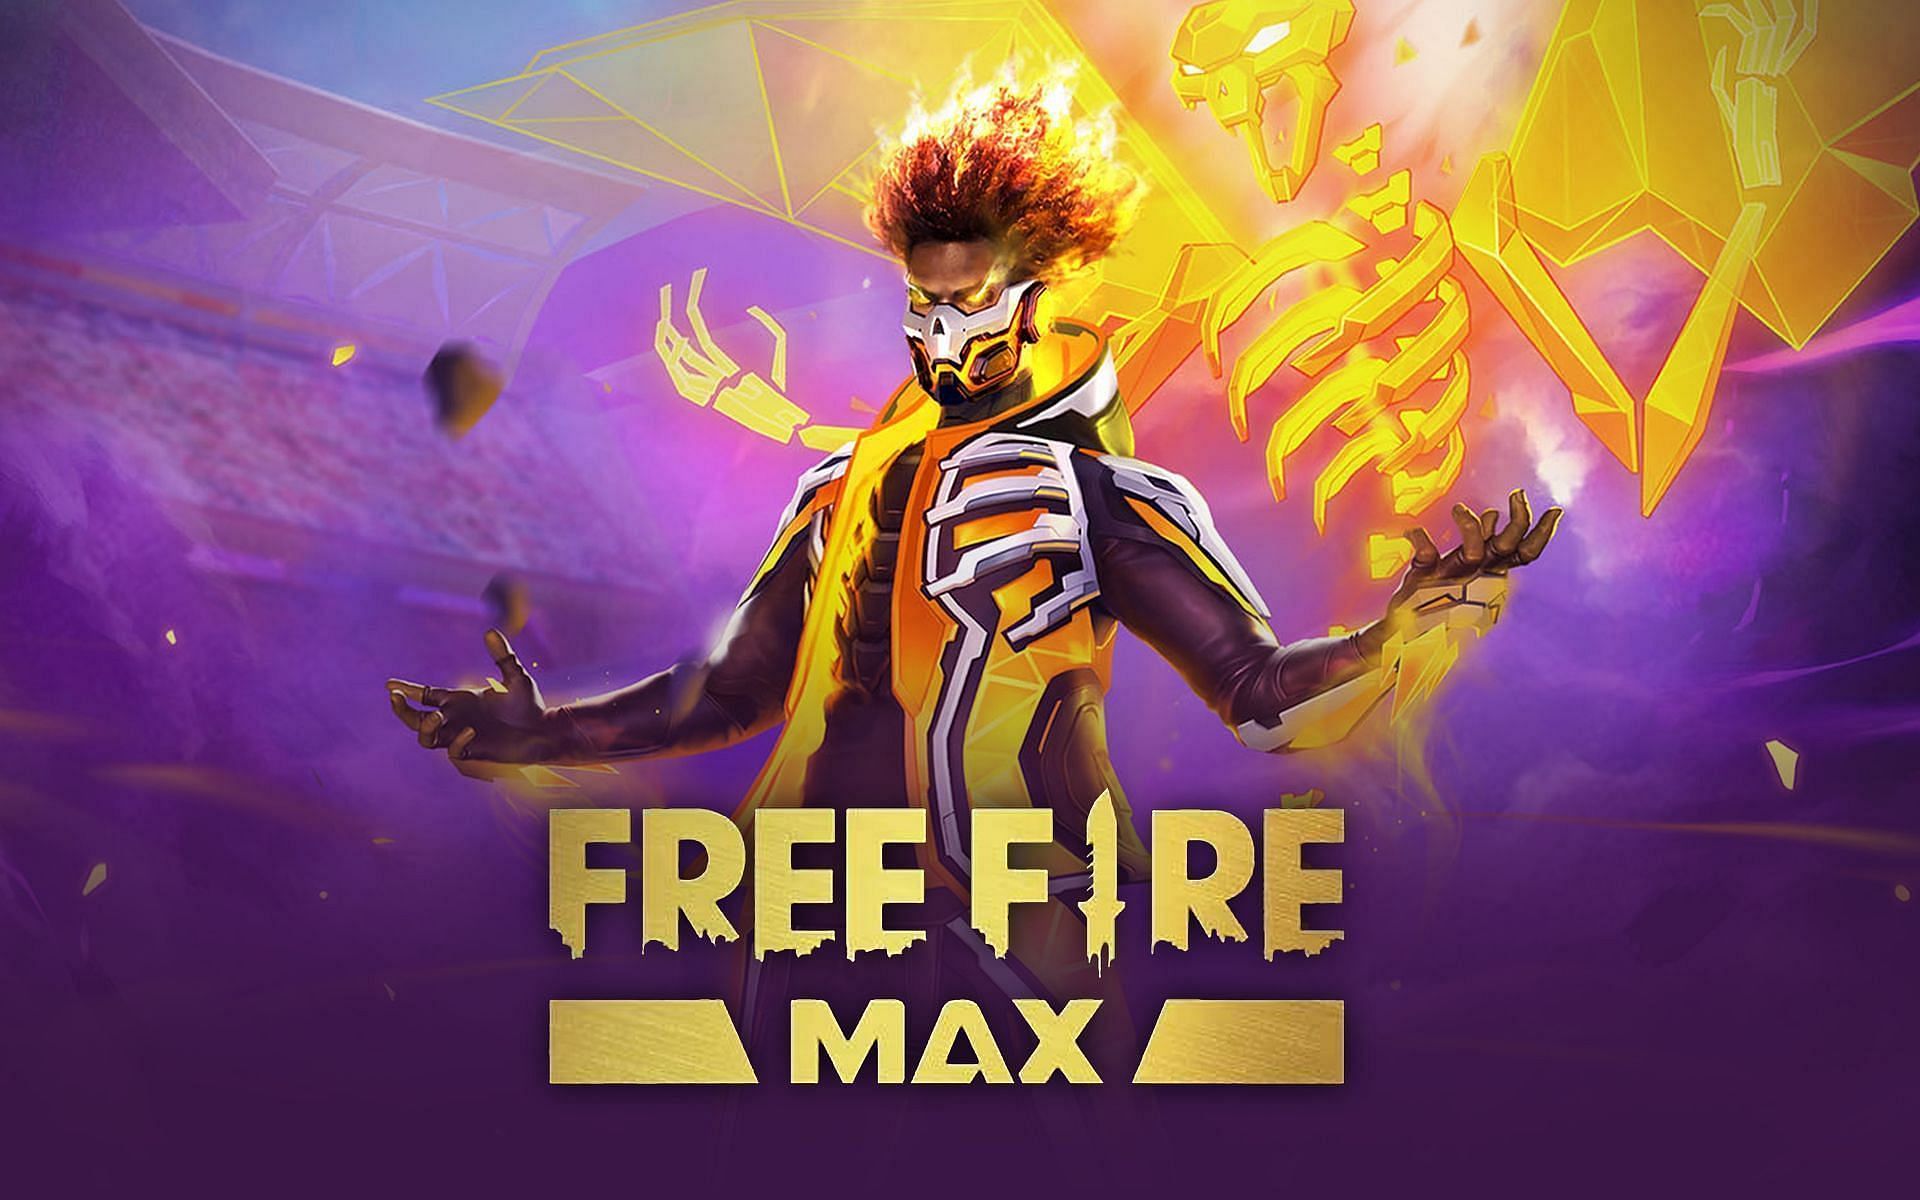 The best Free Fire MAX characters with a price tag of 8000 coins (Image via Sportskeeda)